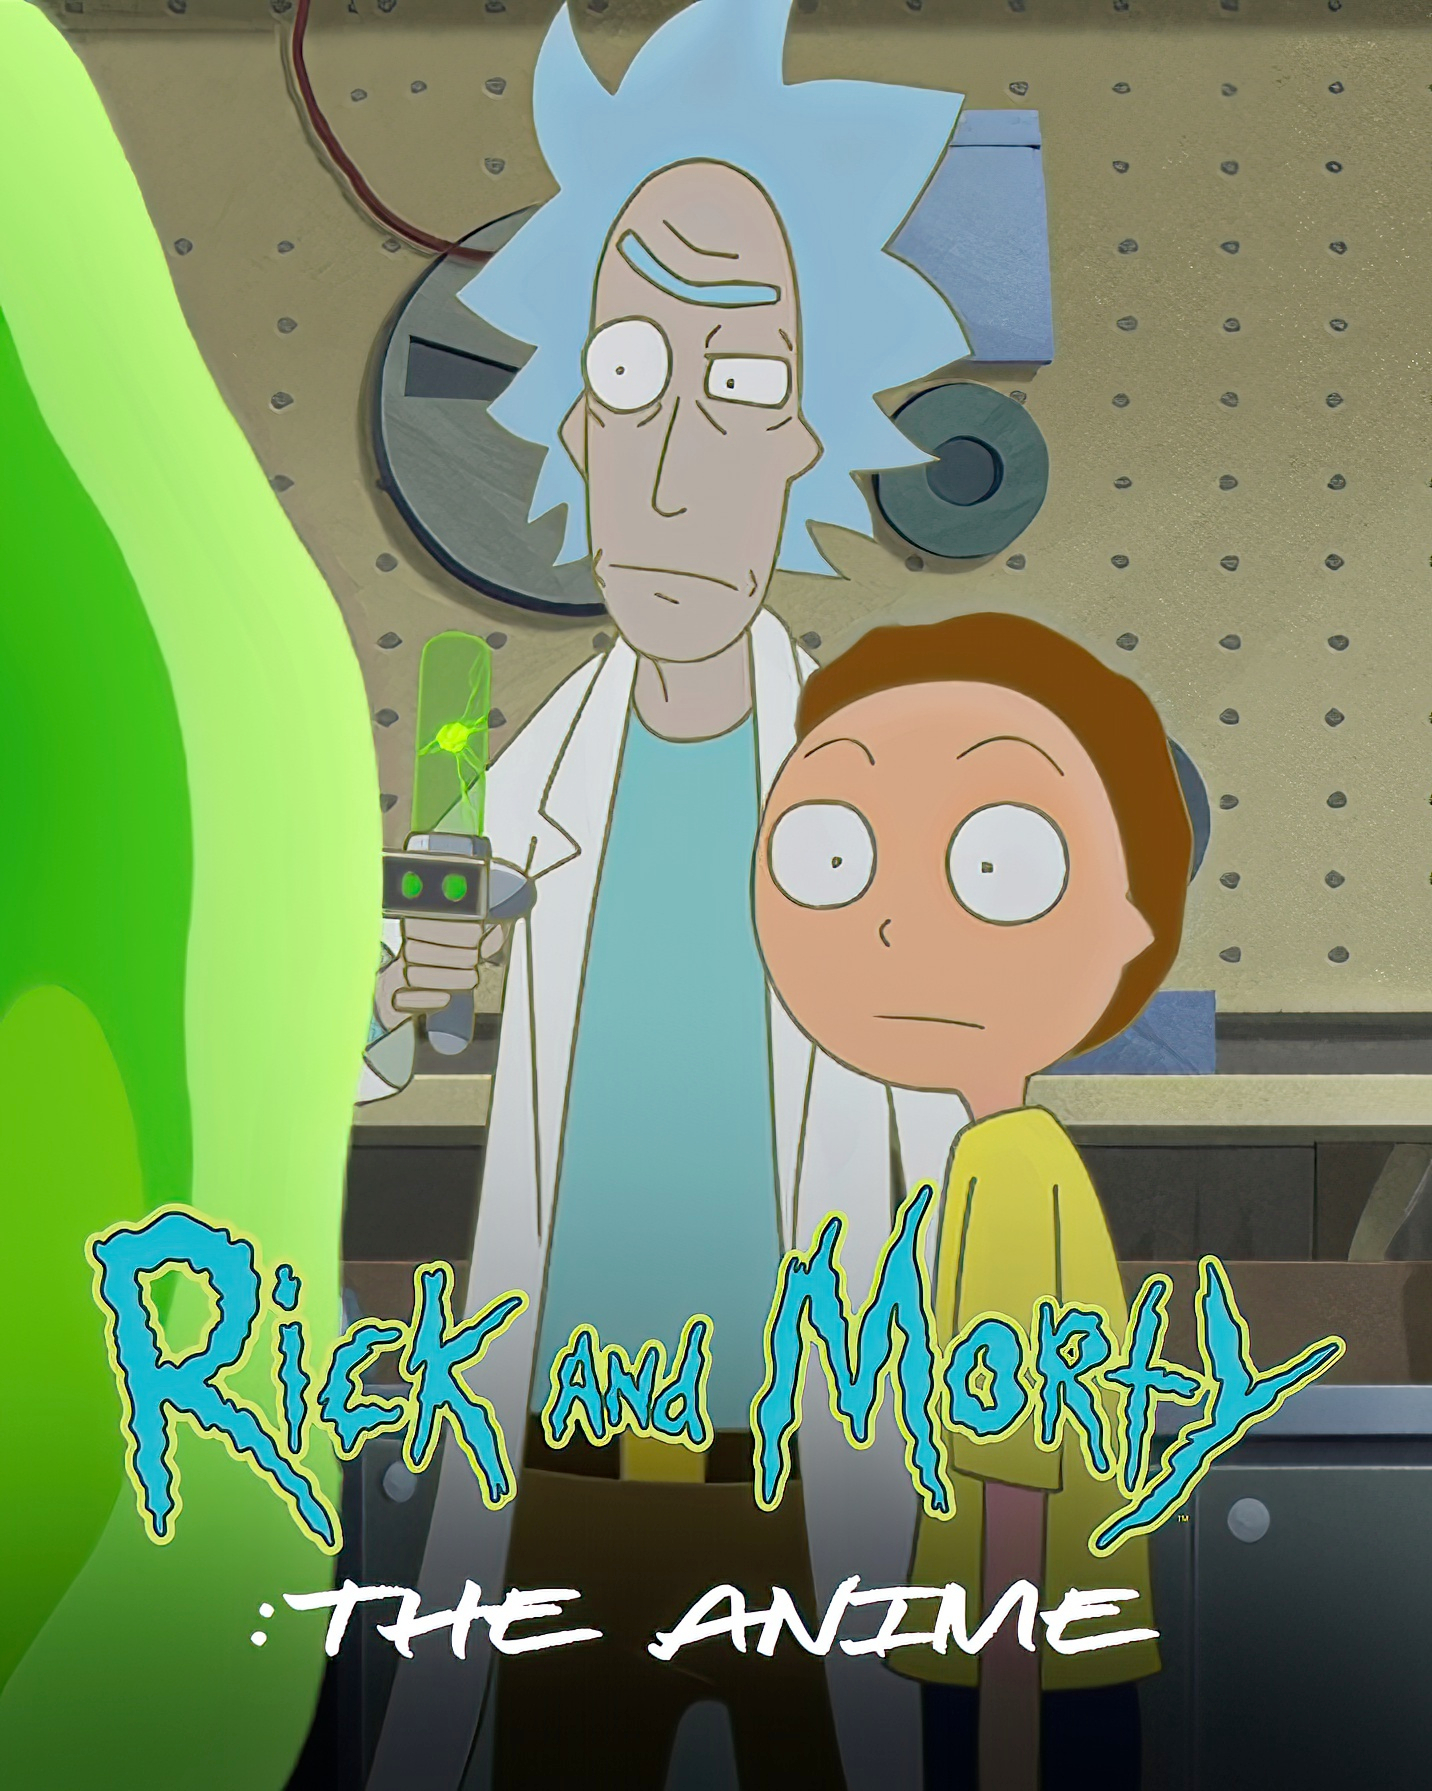 Rick and Morty The Anime poster sees Rick and Morty with different faces